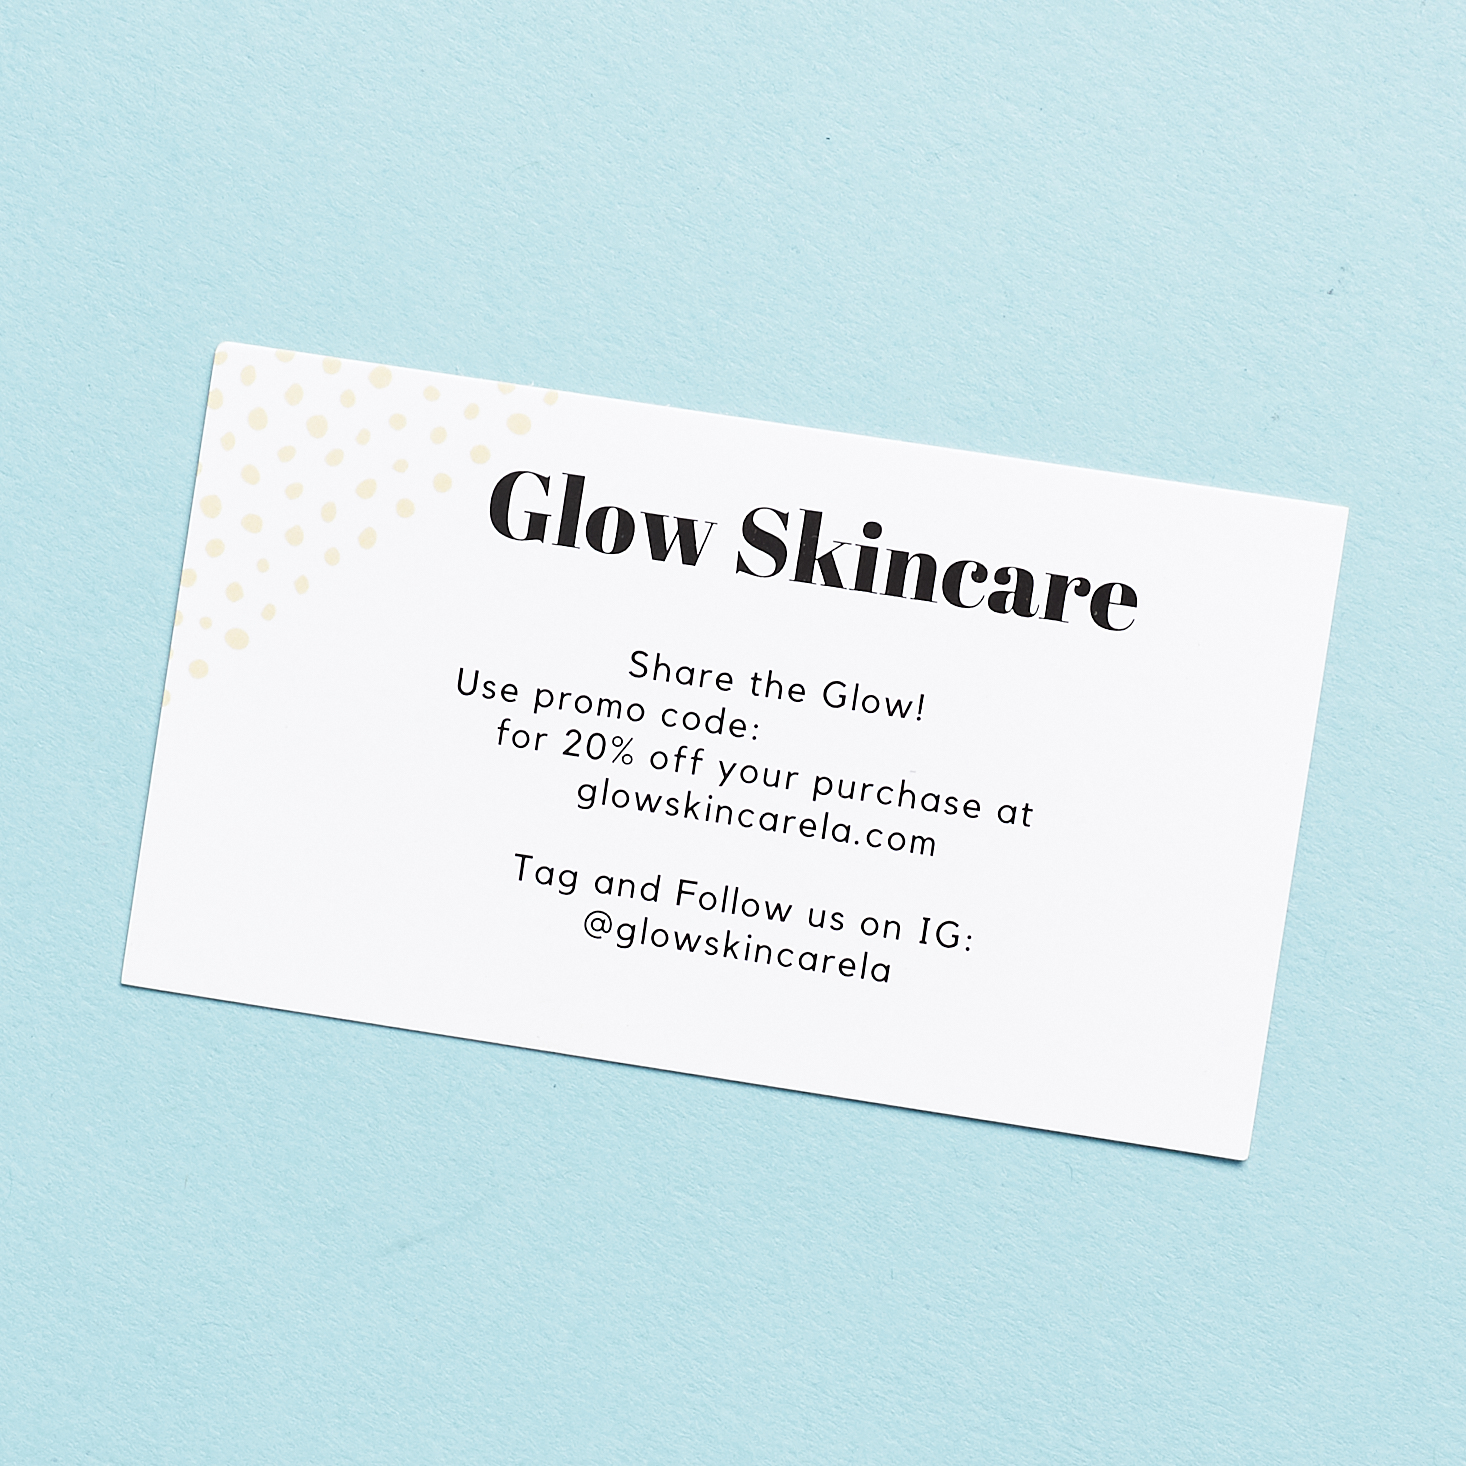 glow skincare card with contact info